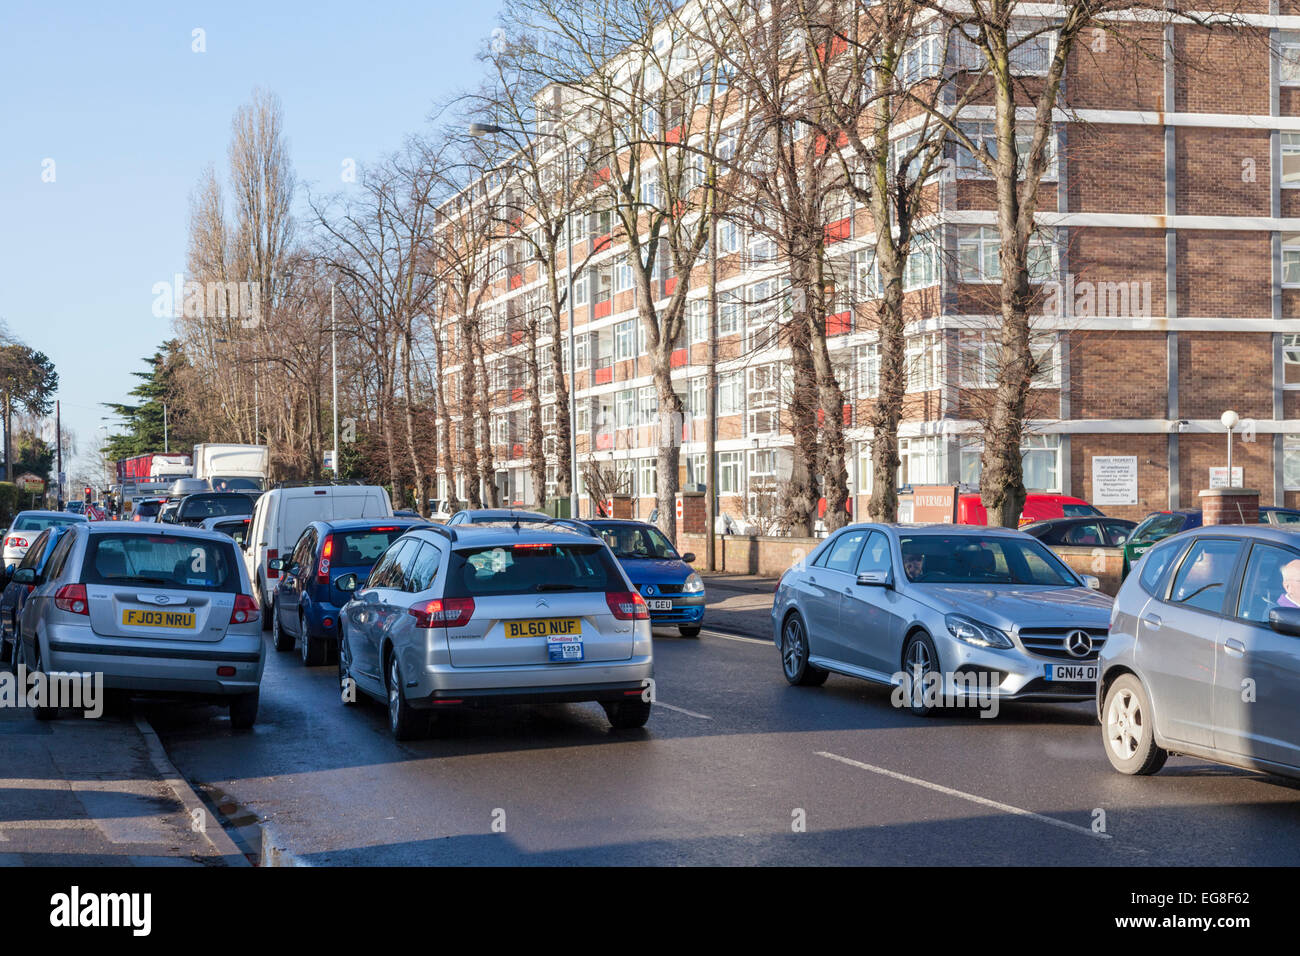 Traffic jam. Congested traffic on both sides of a residential road in winter, West Bridgford, Nottinghamshire, England, UK Stock Photo